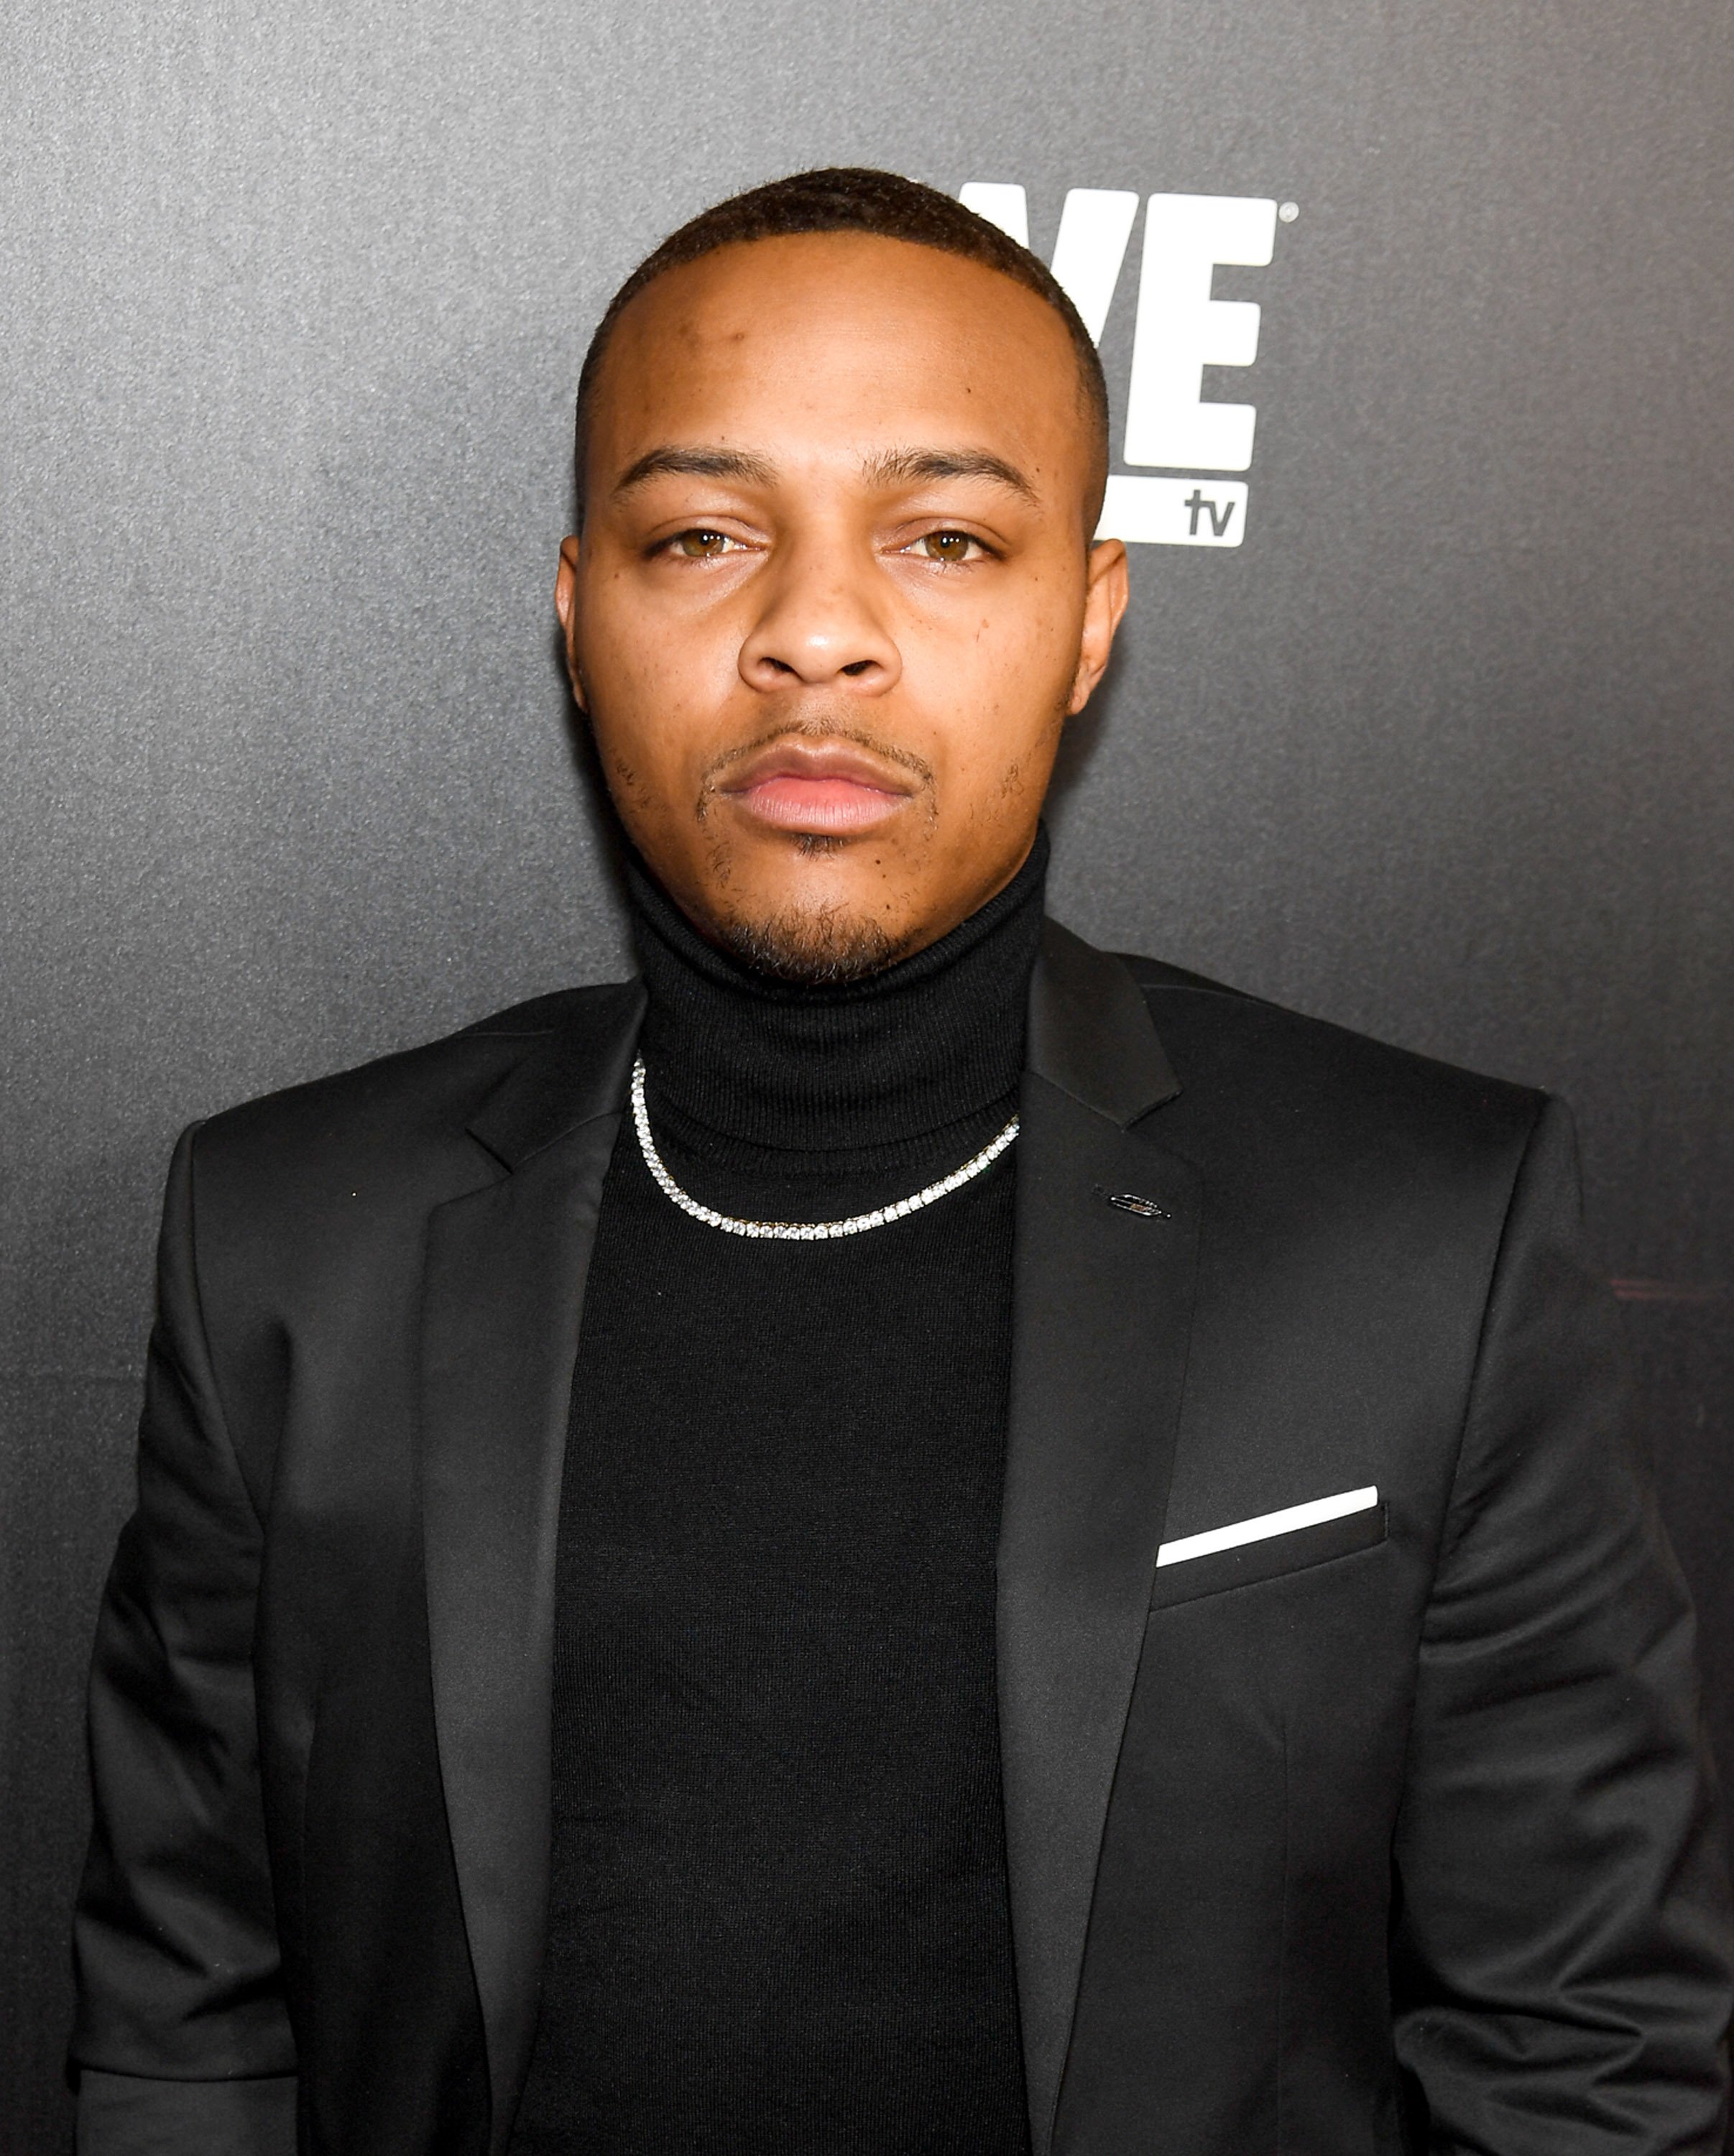 Bow Wow at the "Growing Up Hip Hop Atlanta" season 2 premiere party, 2018 in Atlanta, Georgia | Source: Getty Images